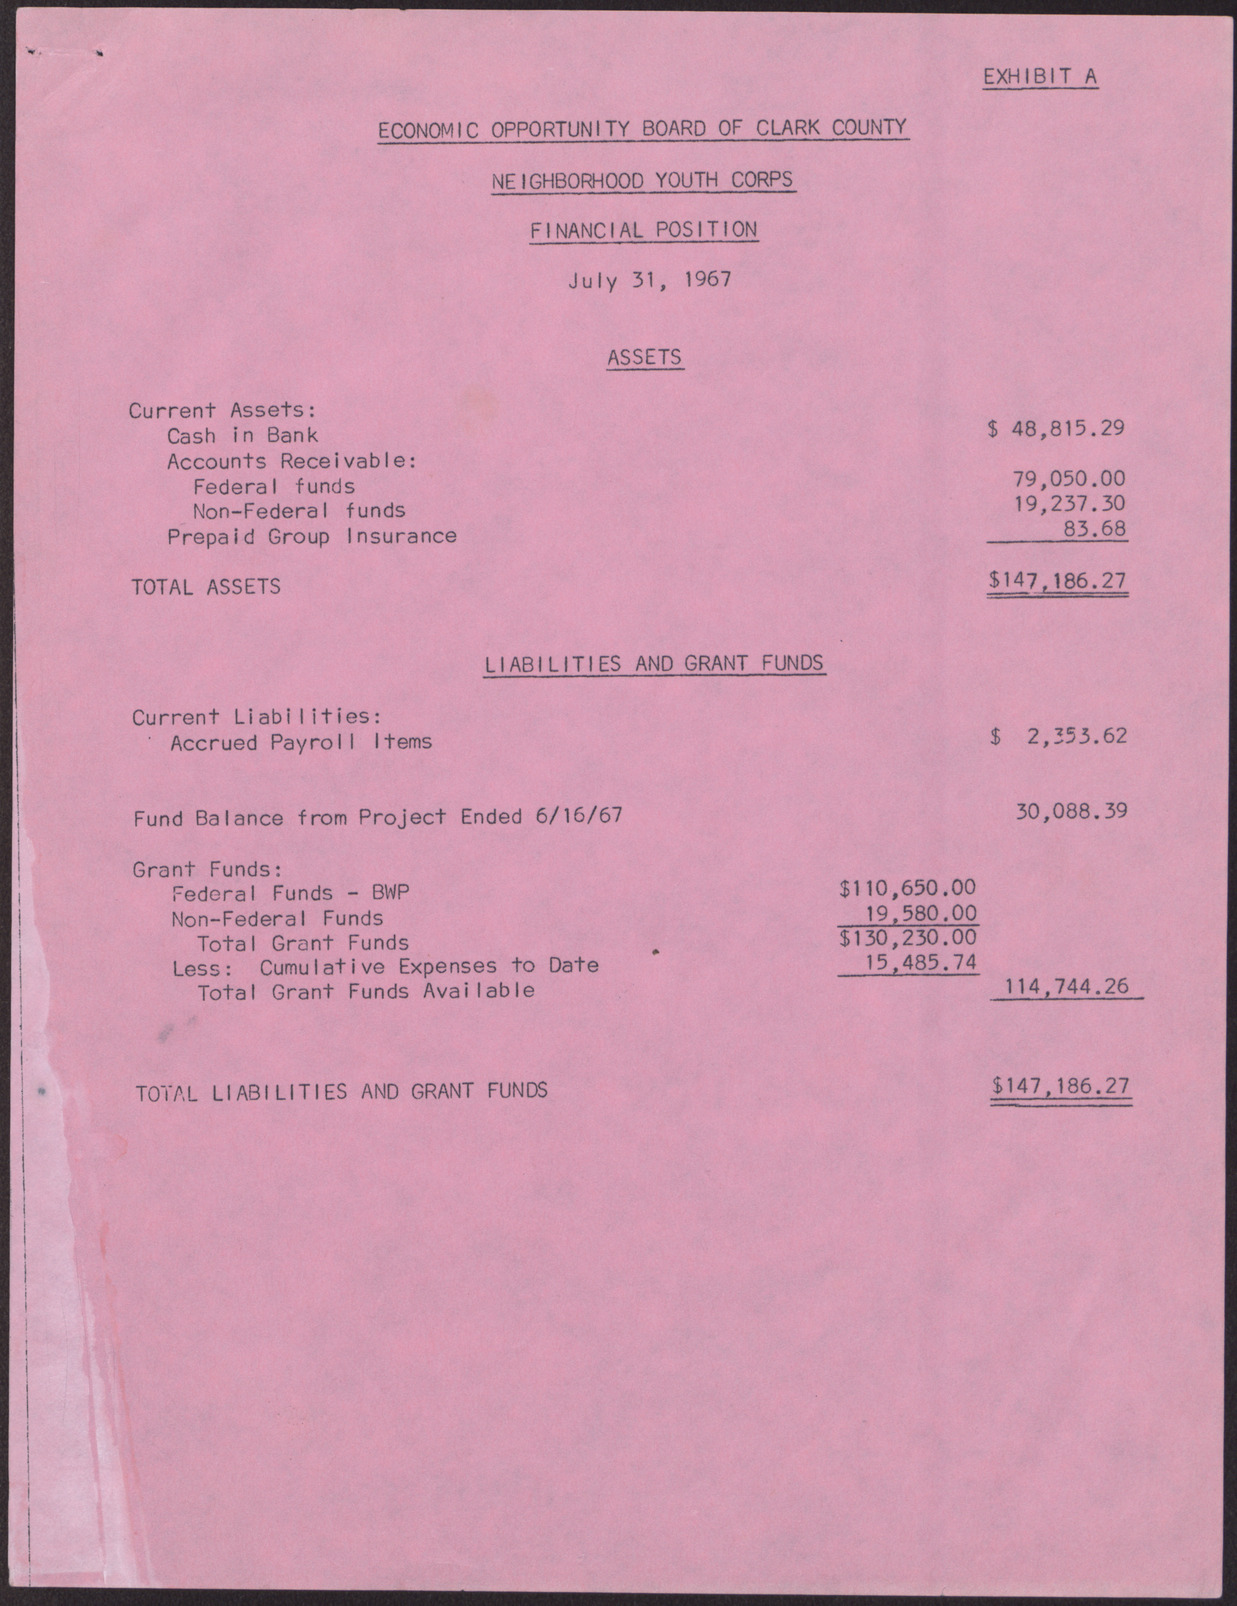 Economic Opportunity Board of Clark County Neighborhood Youth Corps Financial Position, Statement of Budgeted and Actual Expenditures, Schedule of Checks Written (3 pages), July 1967